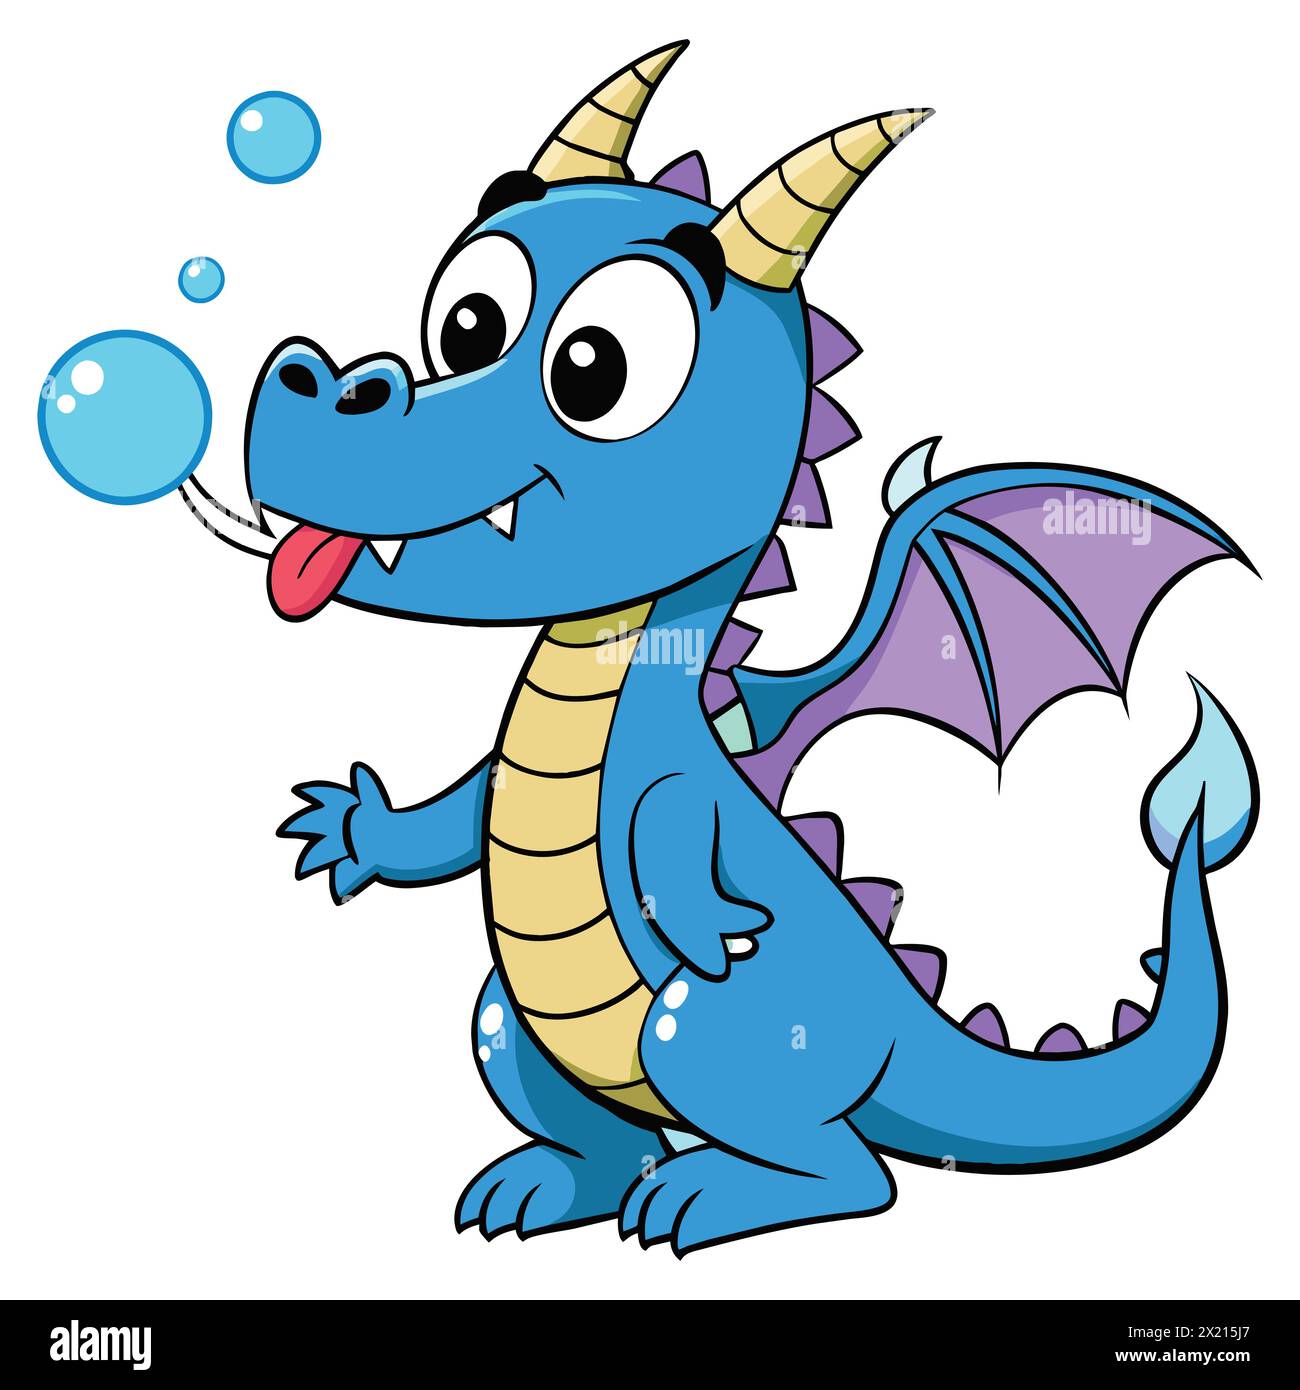 Playful Dragon Blowing Colorful Bubbles. Fantasy Dragon Blowing Magical Bubbles. Magical Dragon Blowing Rainbow Bubbles Stock Vector